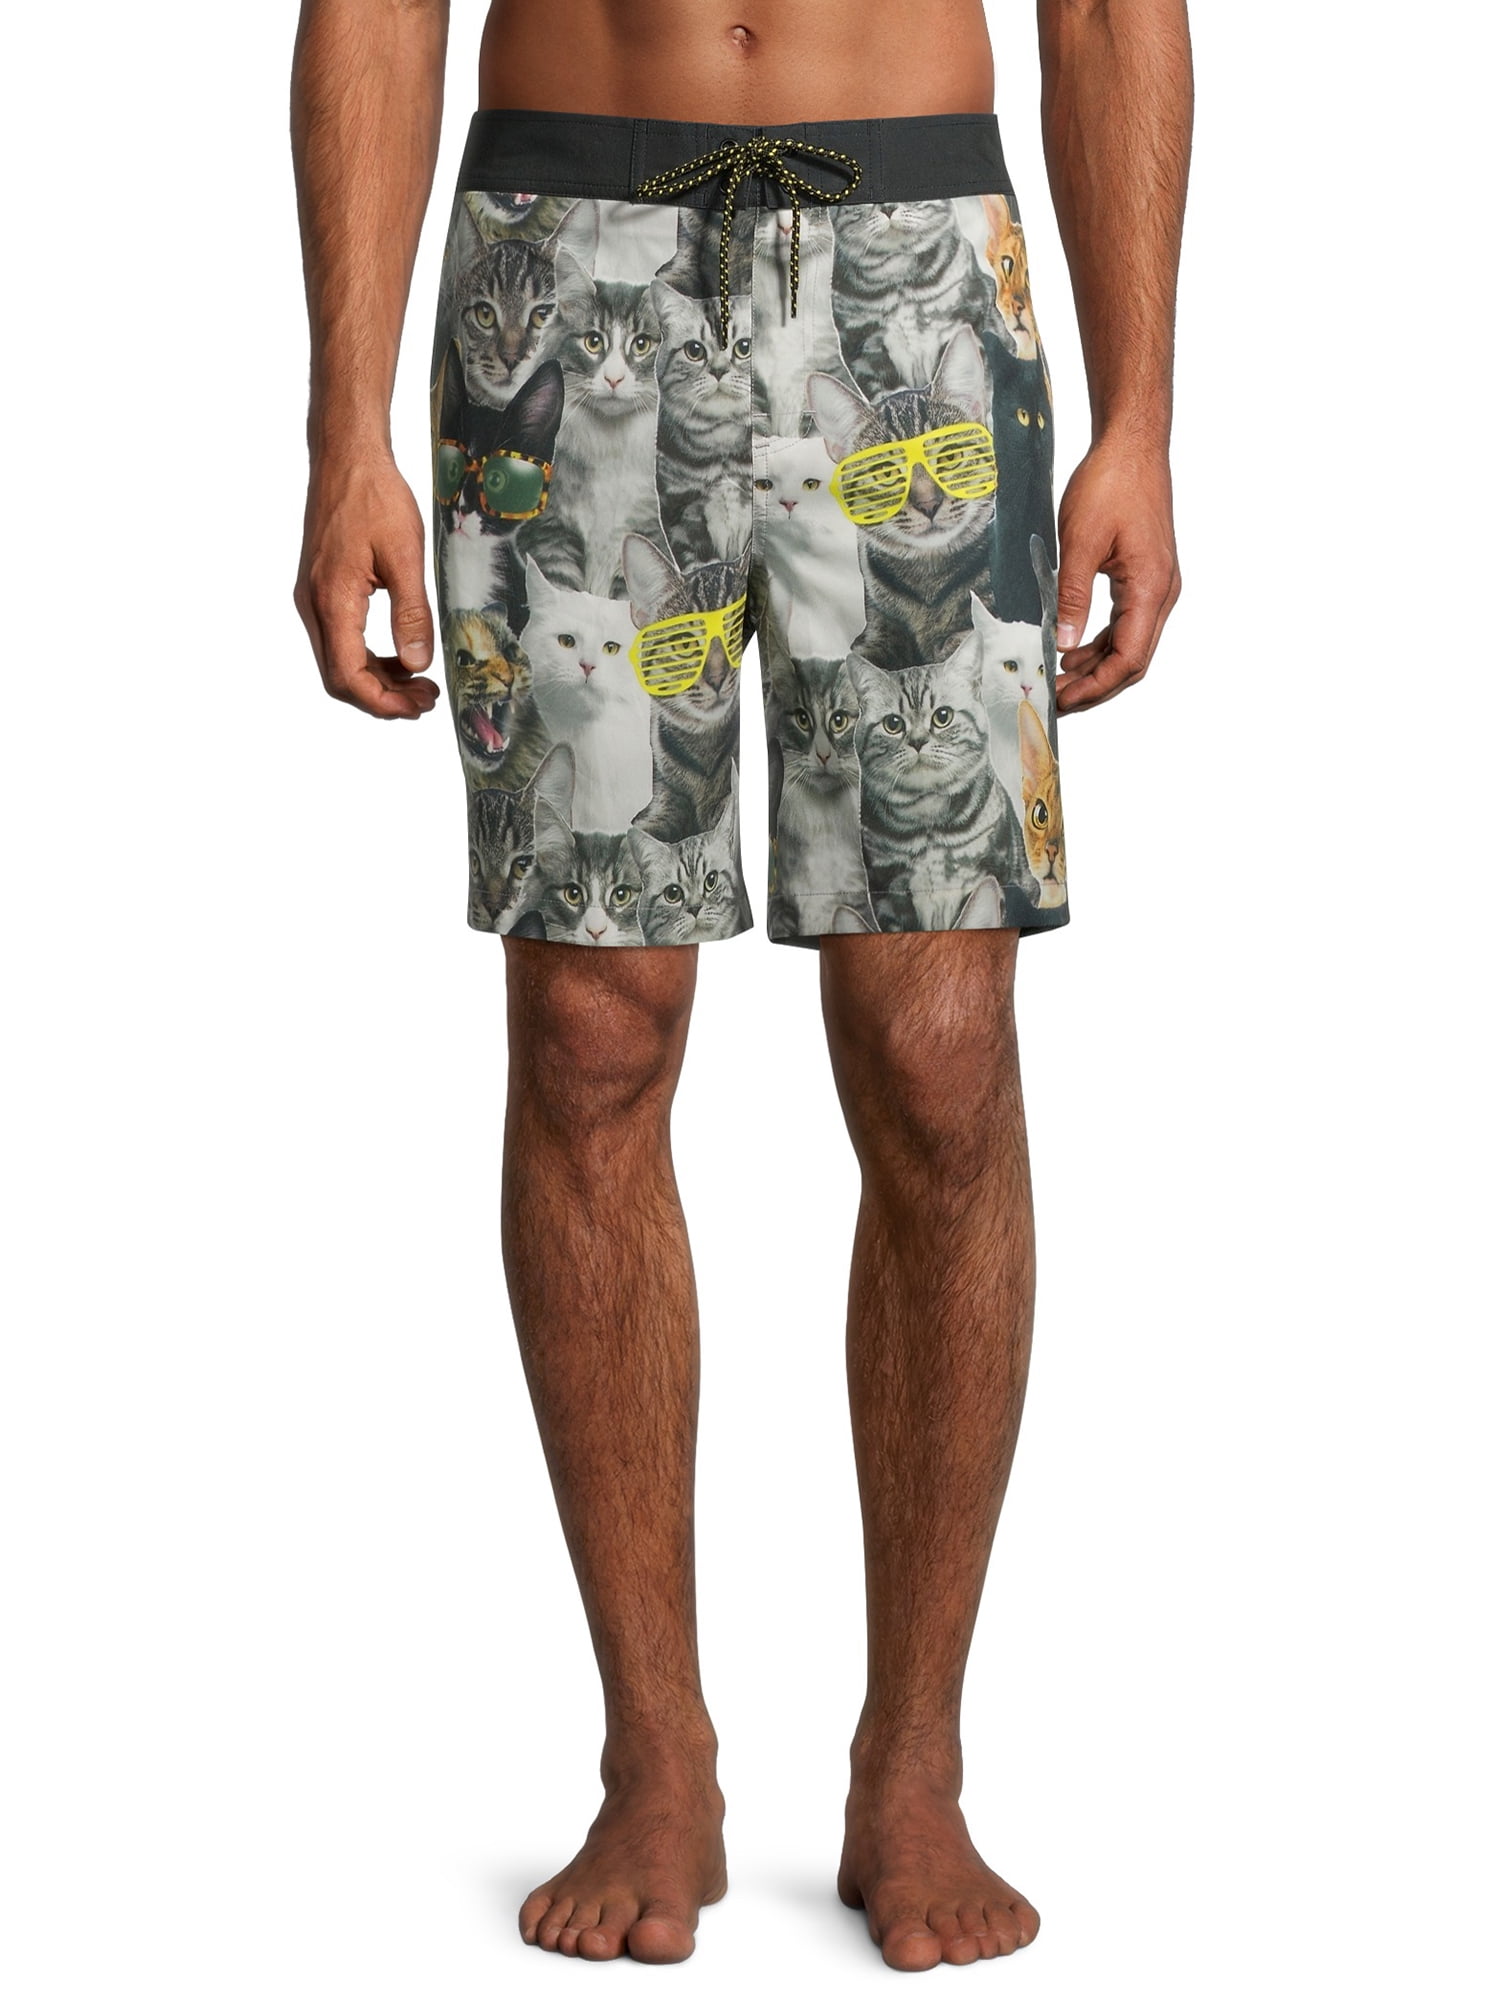 Men Swim Trunks Beach Shorts,Black Cat Silhouettes in Different Poses Domestic Pets Kitty Paws Tail and Whiskers